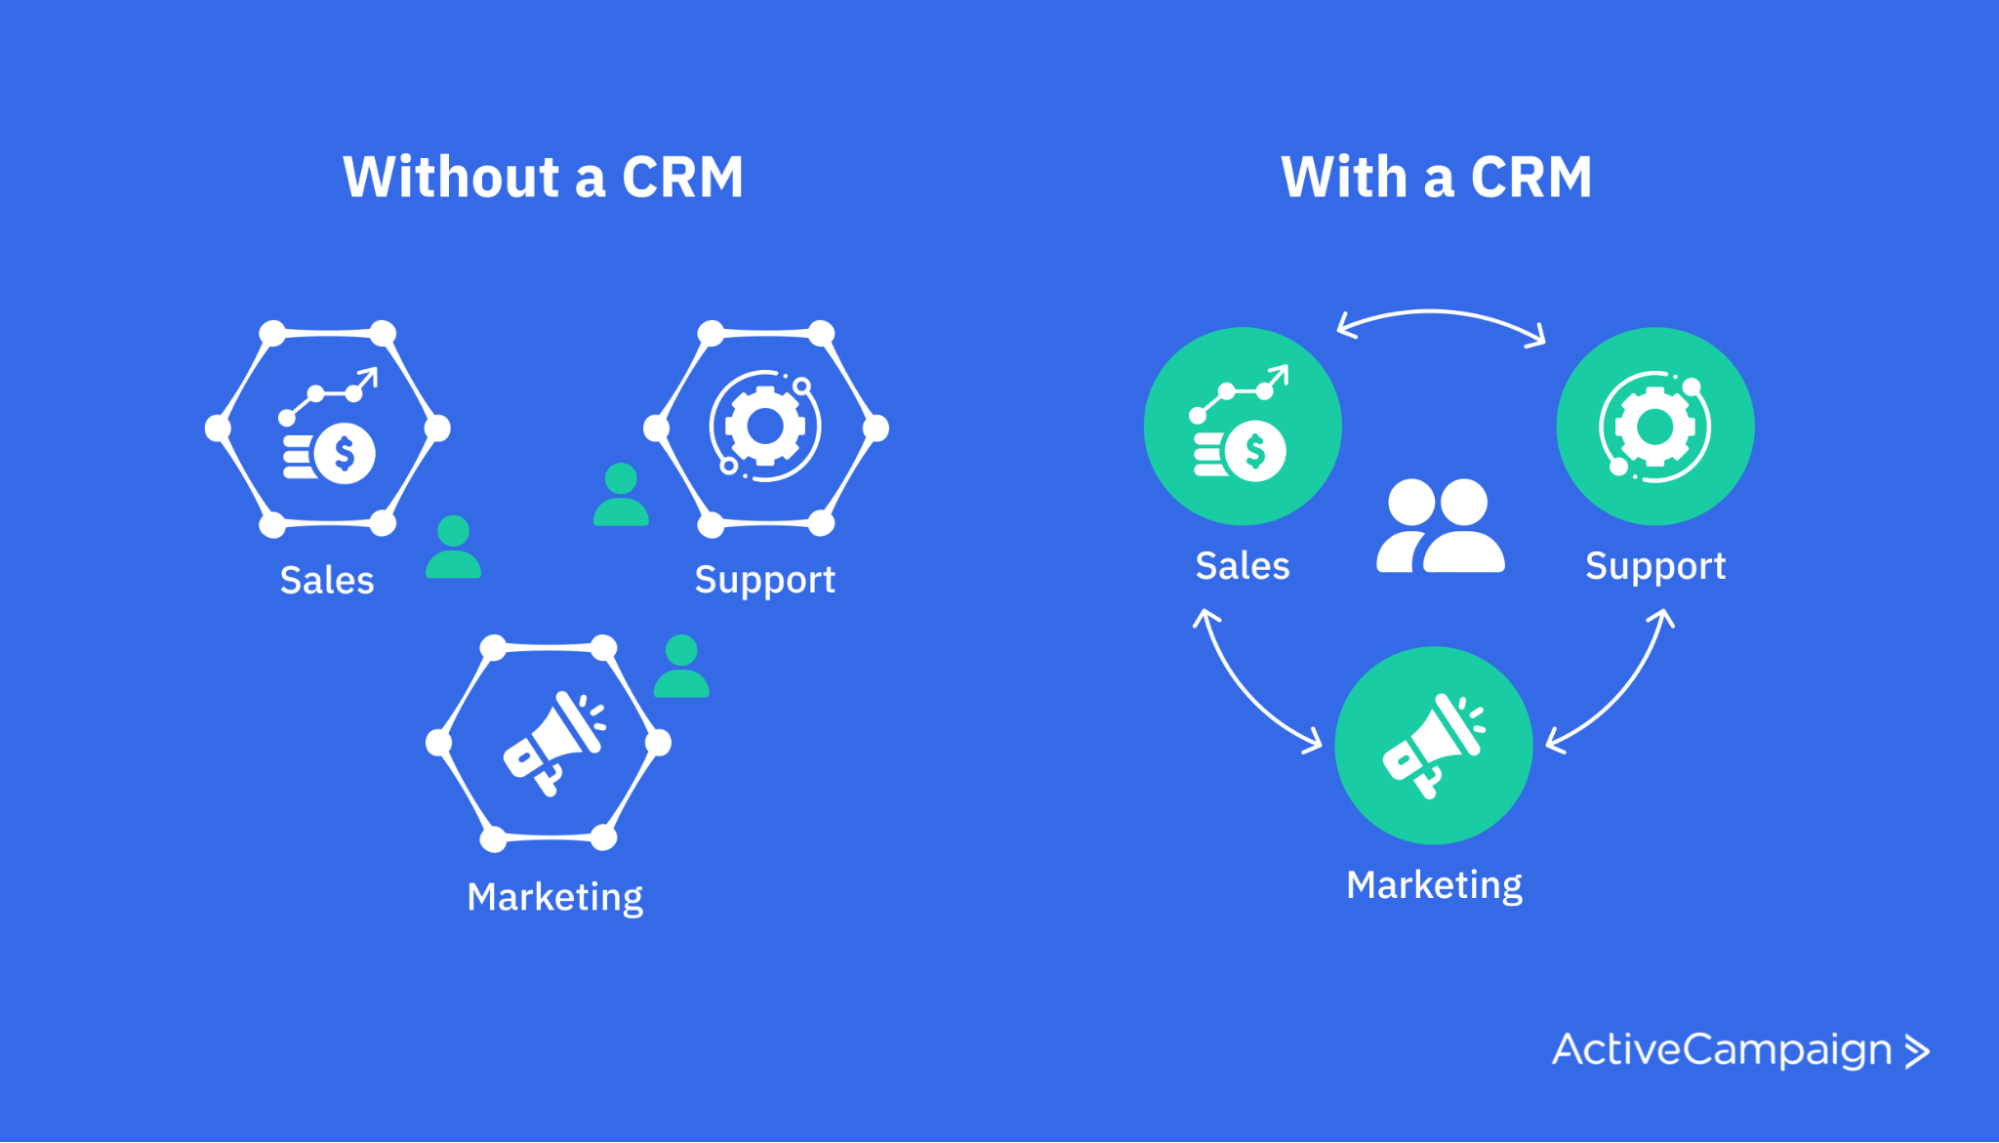 infographic showing what does a crm do, indicating that sales, marketing, and support all benefit from having one